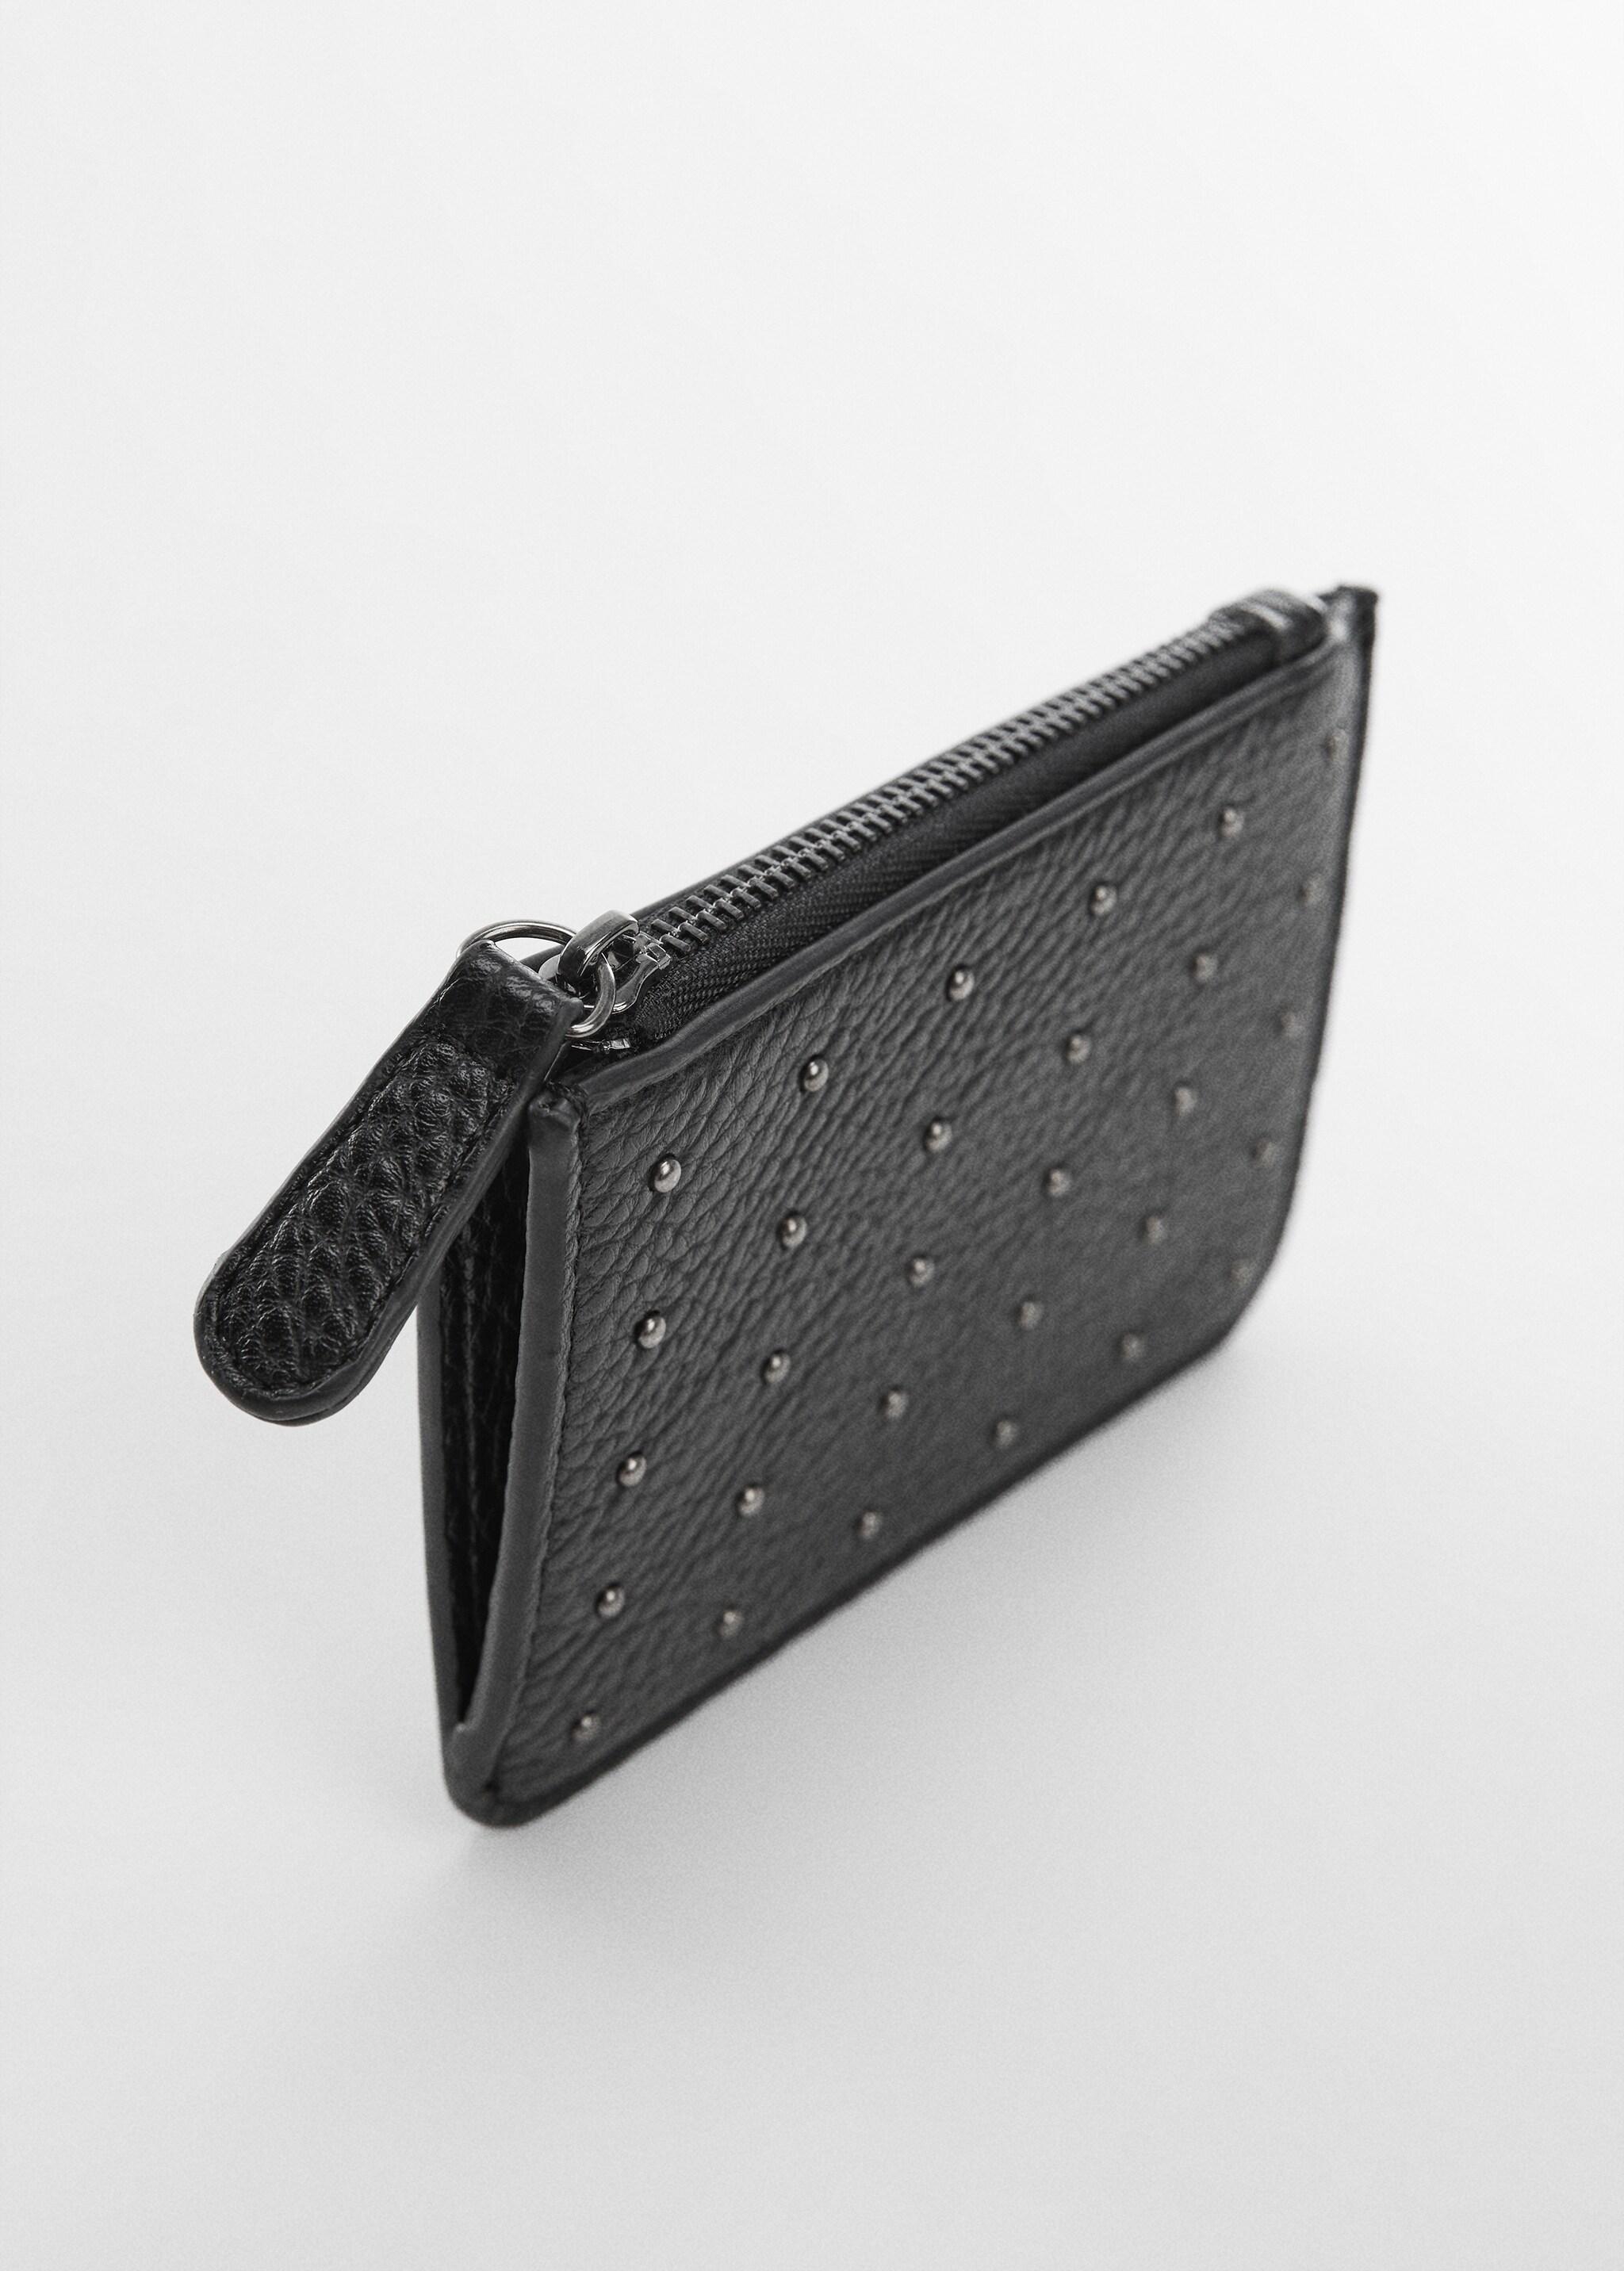 Studded purse - Details of the article 1